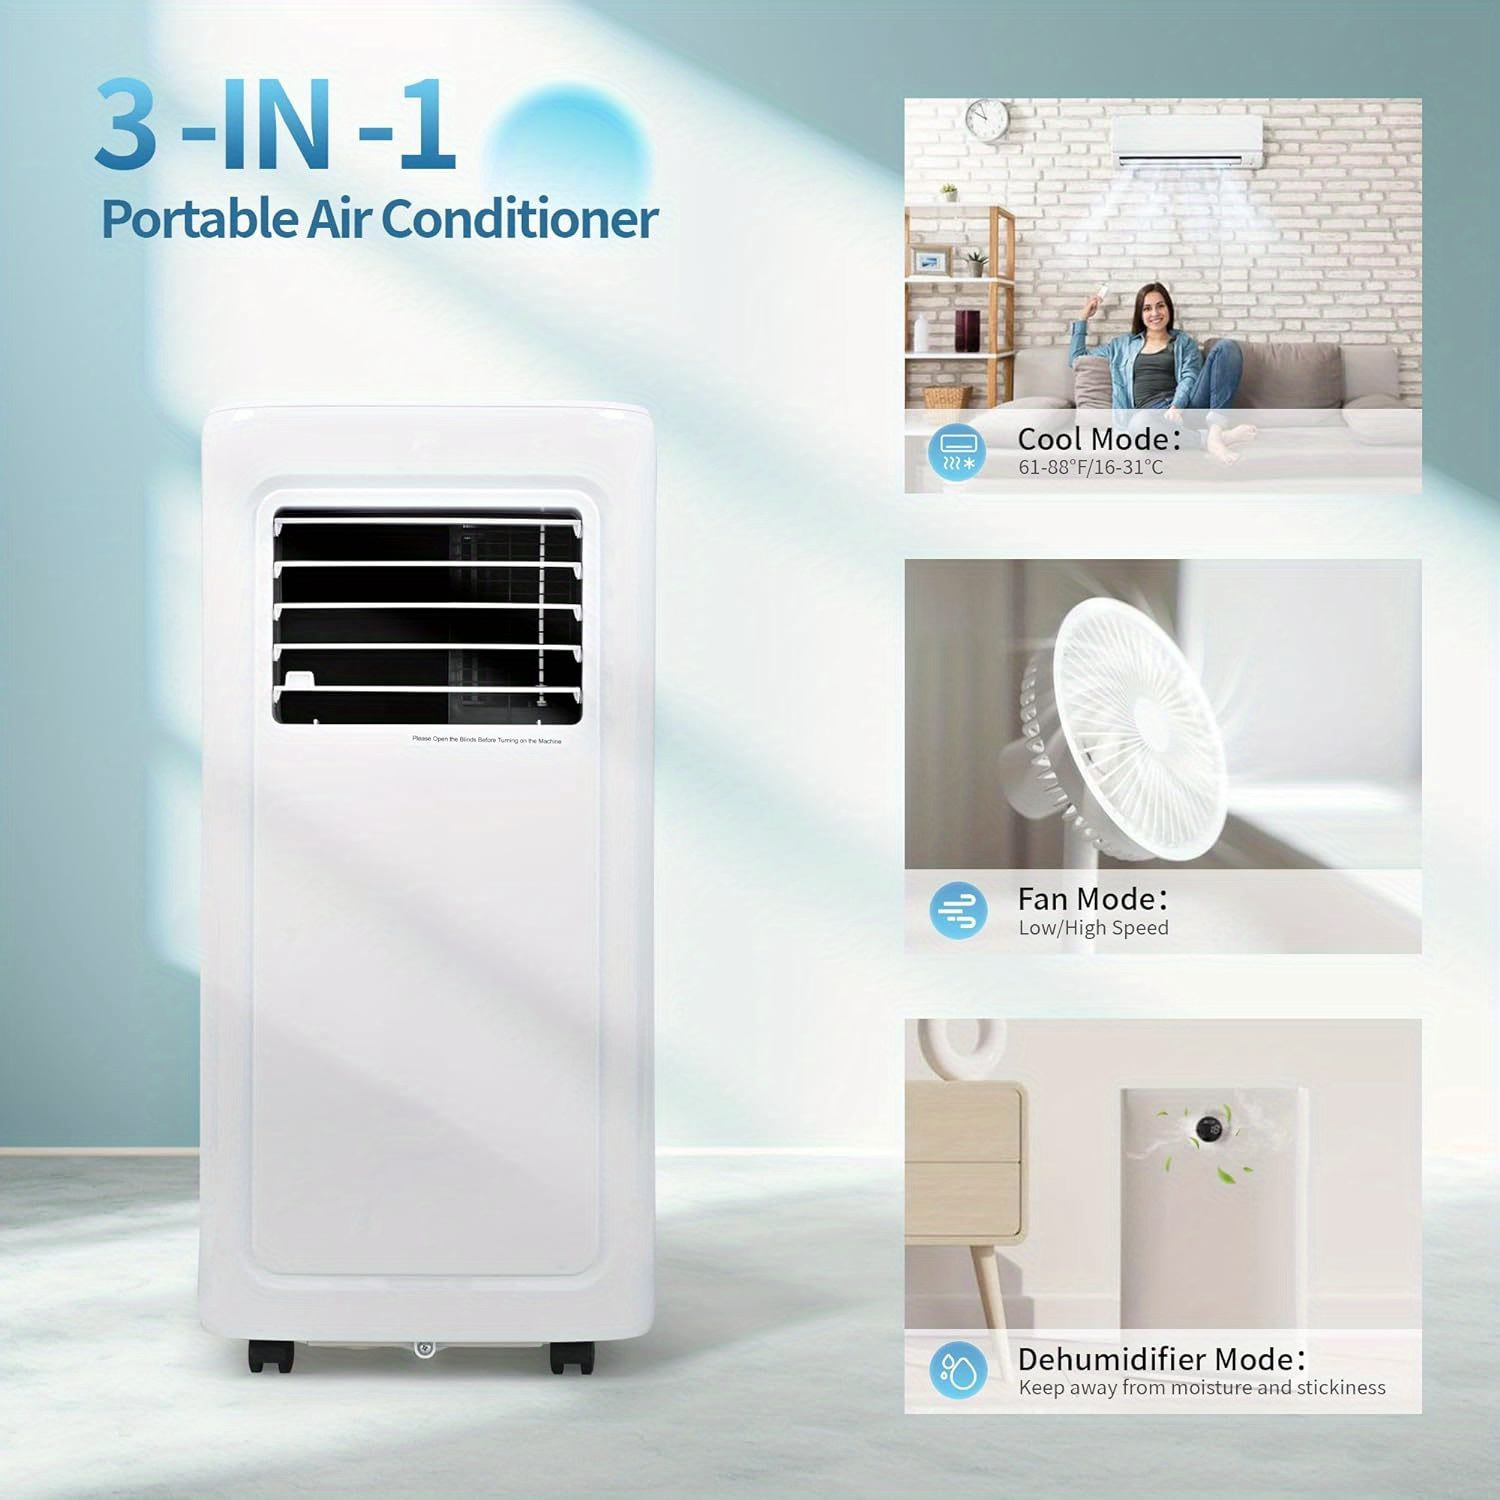 

Compact 8, 000 Btu - Multifunctional Floor Ac Unit With Cooling, Dehumidifying, And Fan Modes, Easy Installation Kit And Remote Control, Perfect For Spaces Up To 350 Sq. Ft. - White